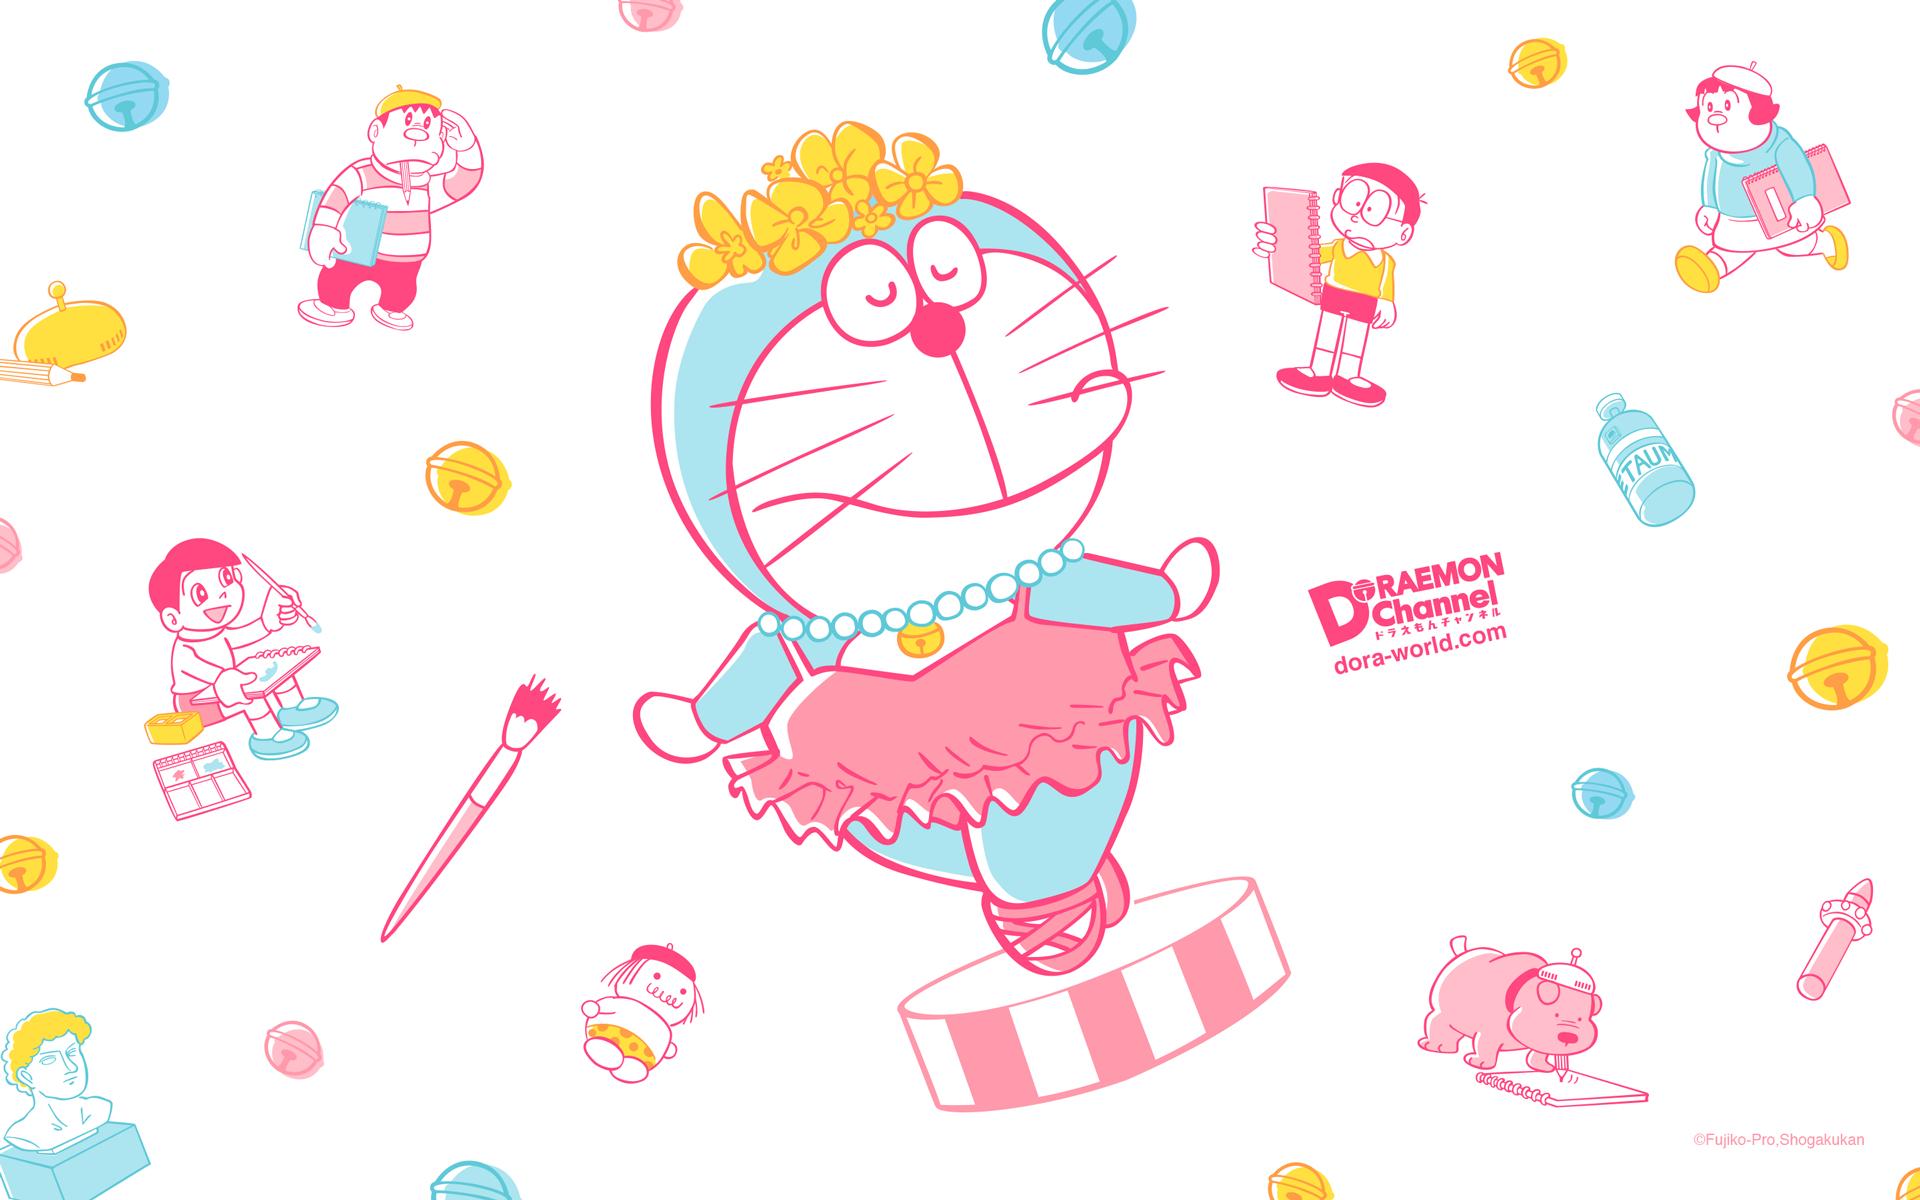 Download wallpaper for 2048x1152 resolution | Doraemon with Hello Kitty ...